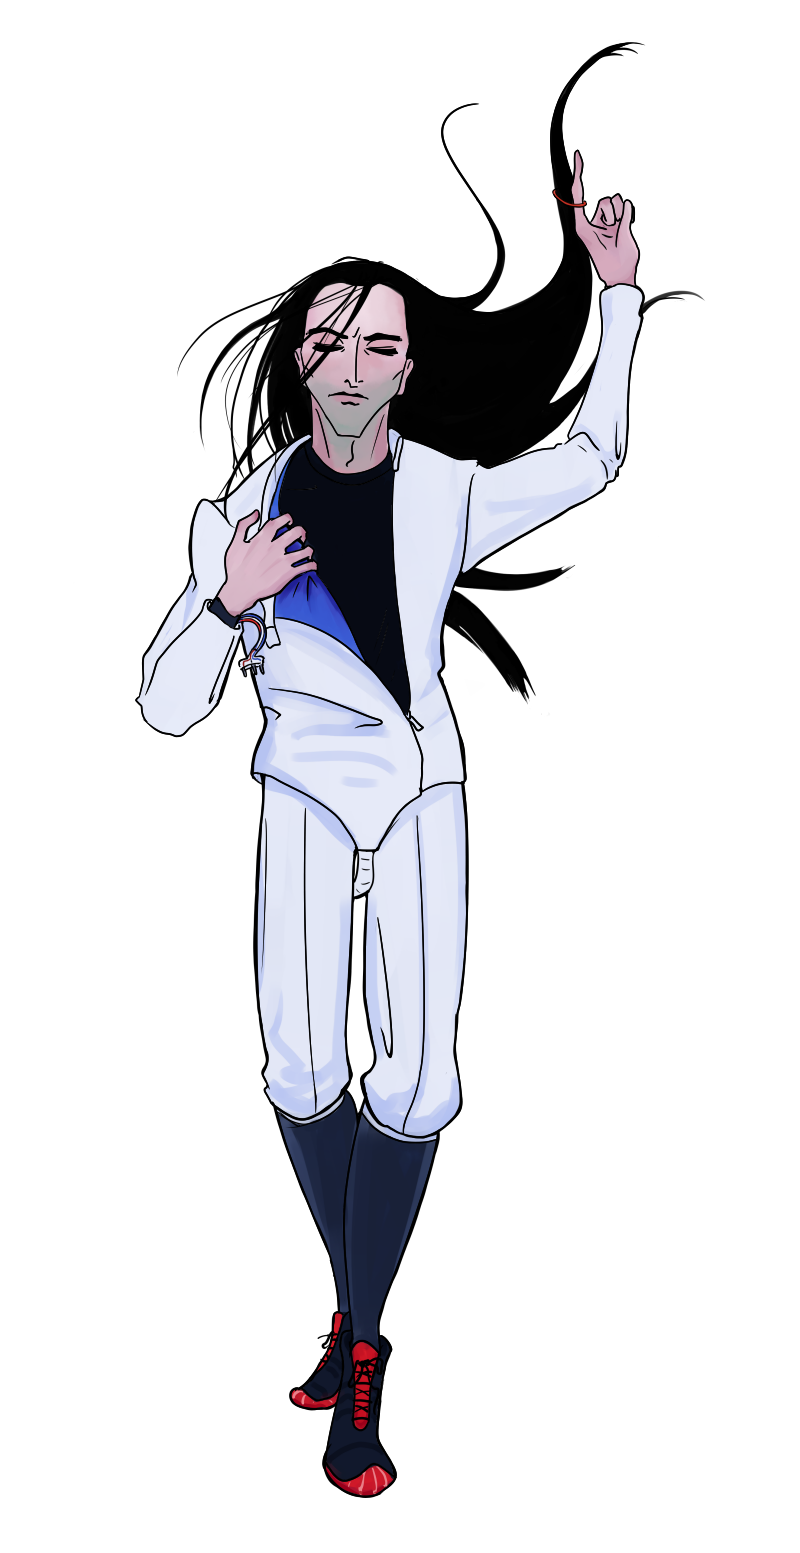 A severe-looking fencer loosening his jacket and hairtie in a featureless white void